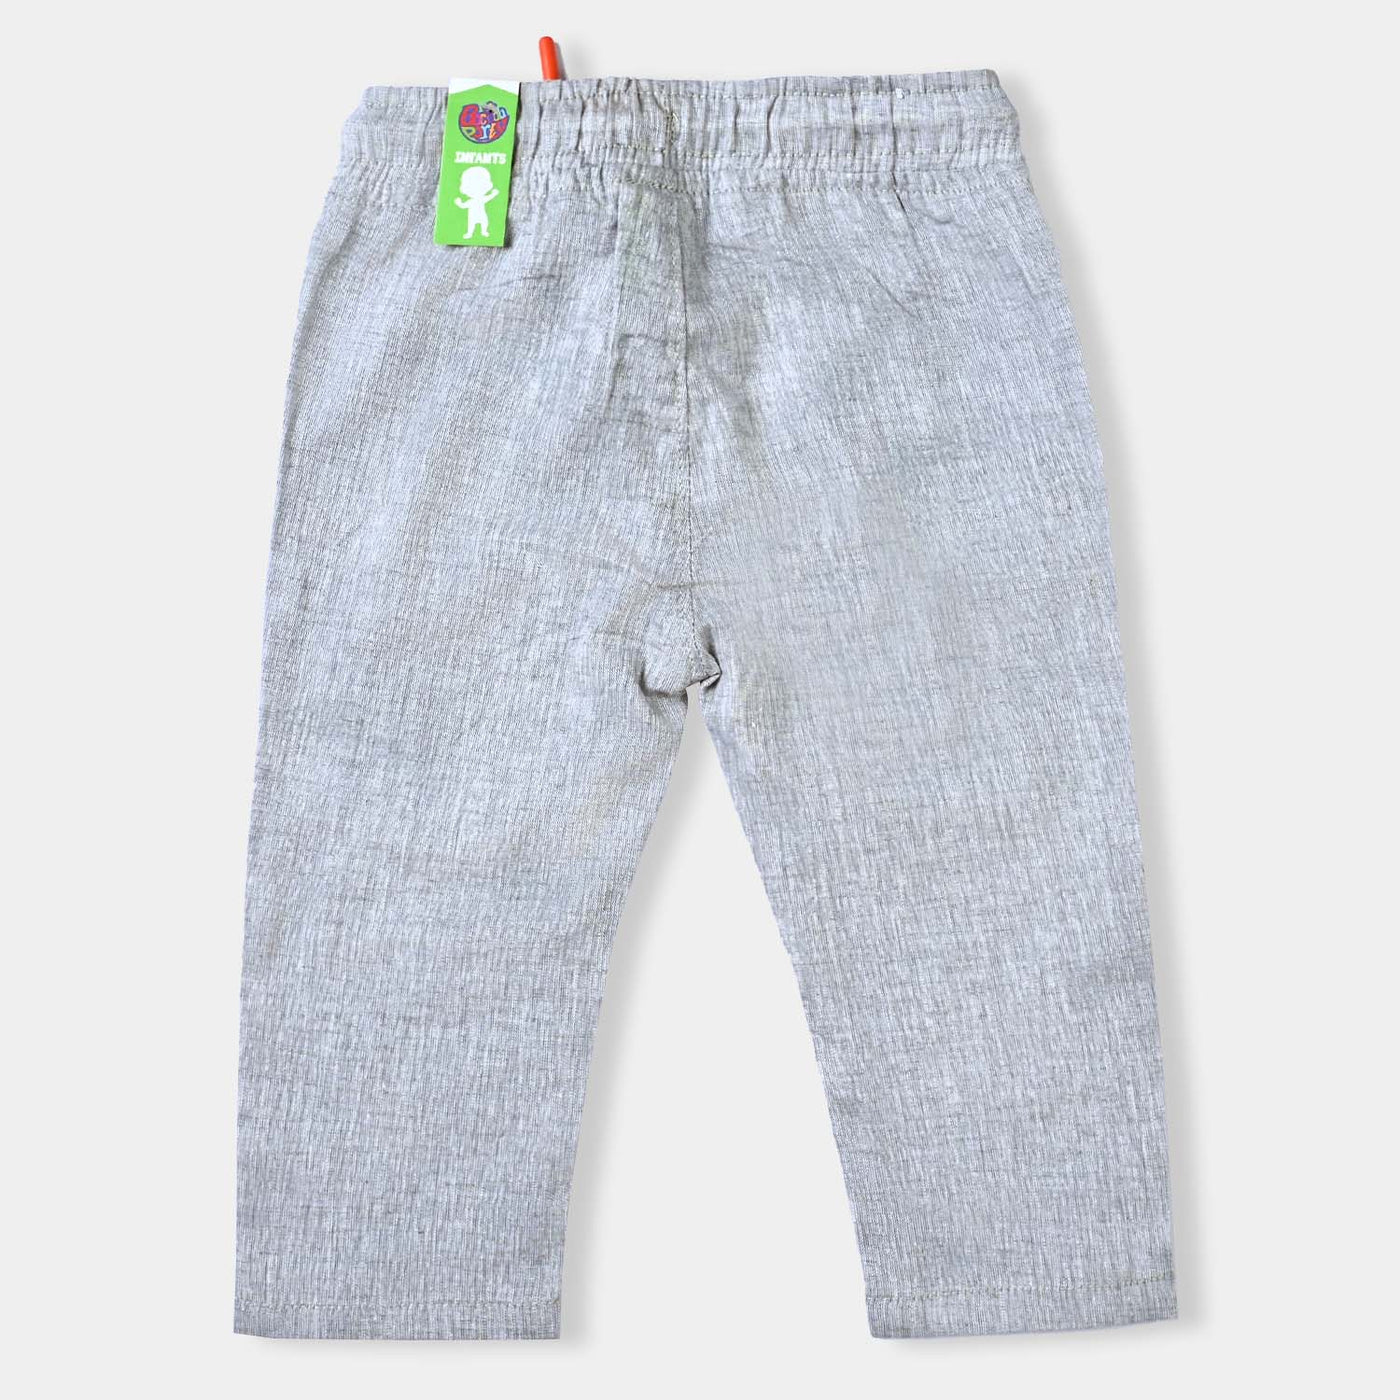 Infant Boys Cotton Pant Awesome - Grey